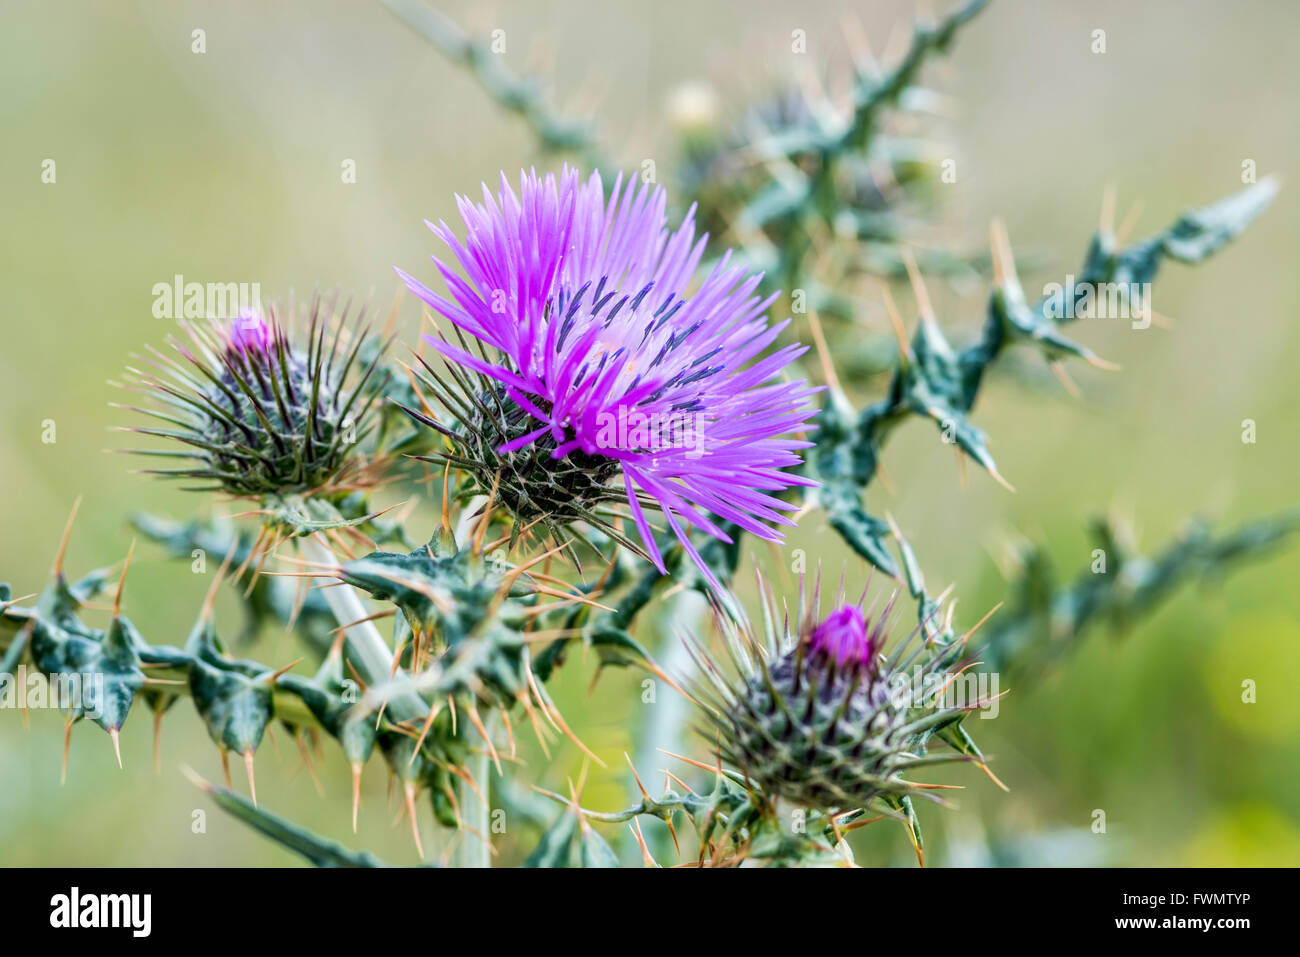 Slender Thistle flower with the plants spiny leaves showing Stock Photo